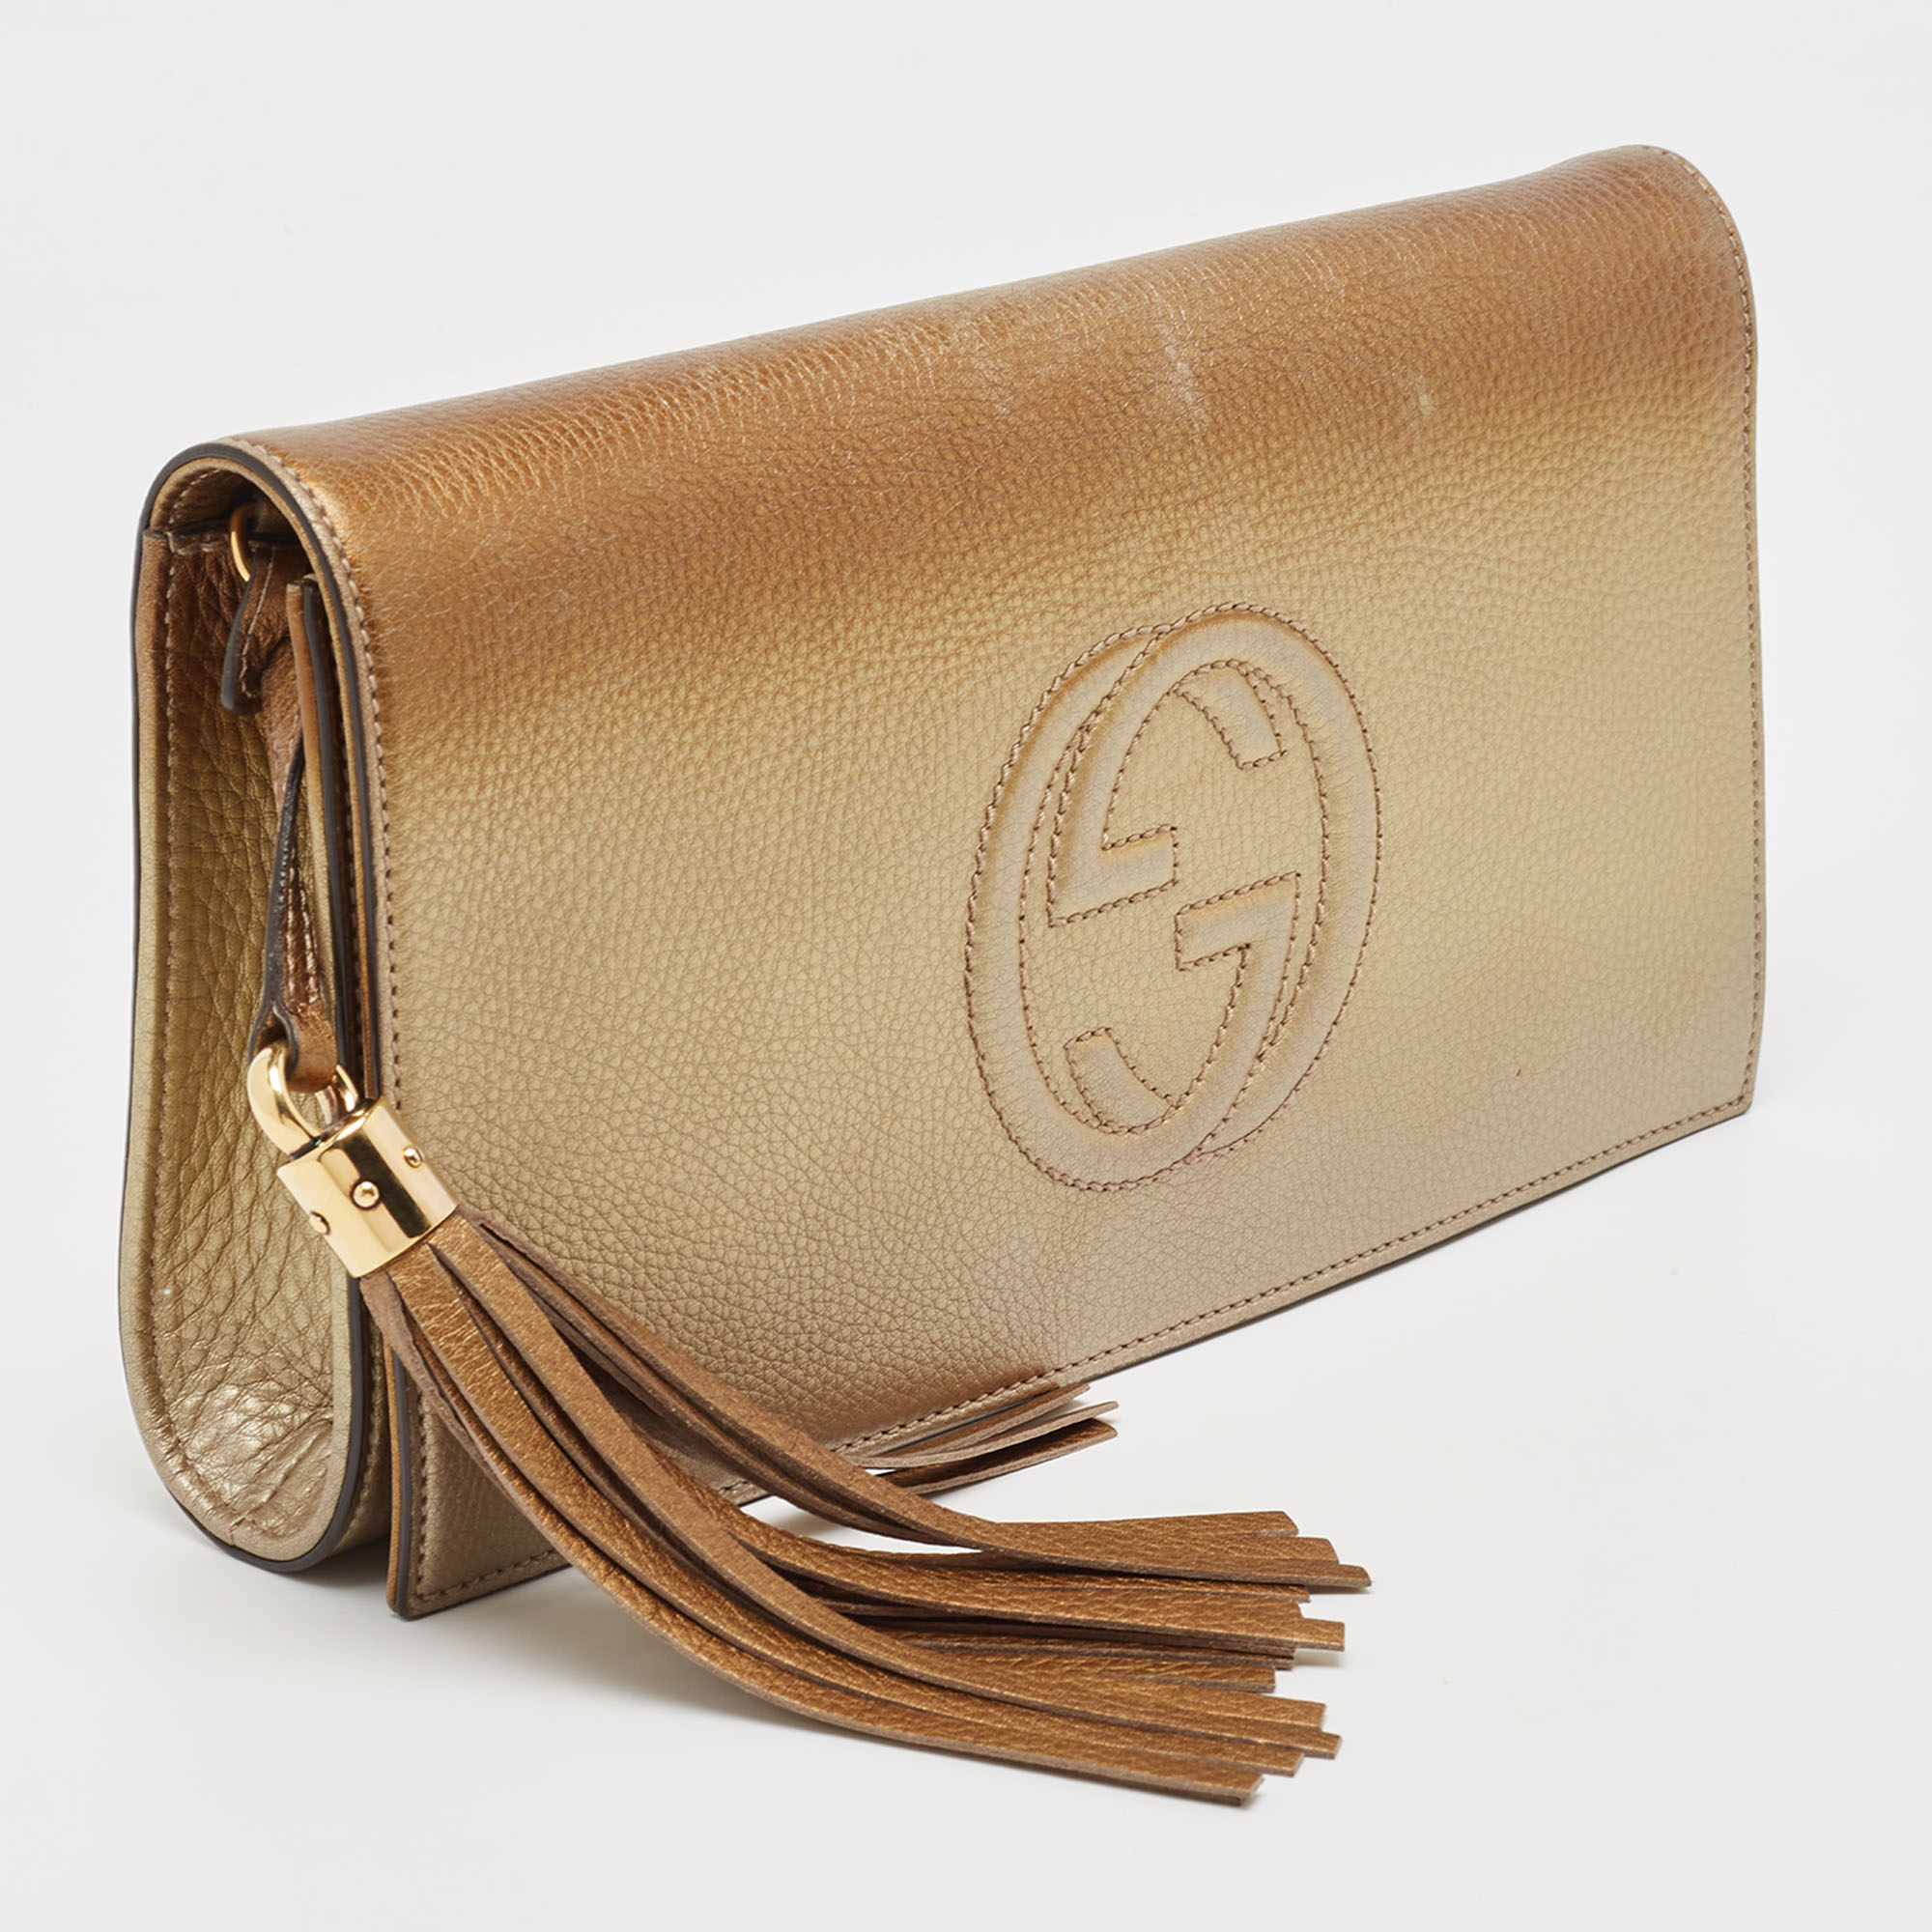 Gucci Gold Ombre Leather Soho Tassel Clutch